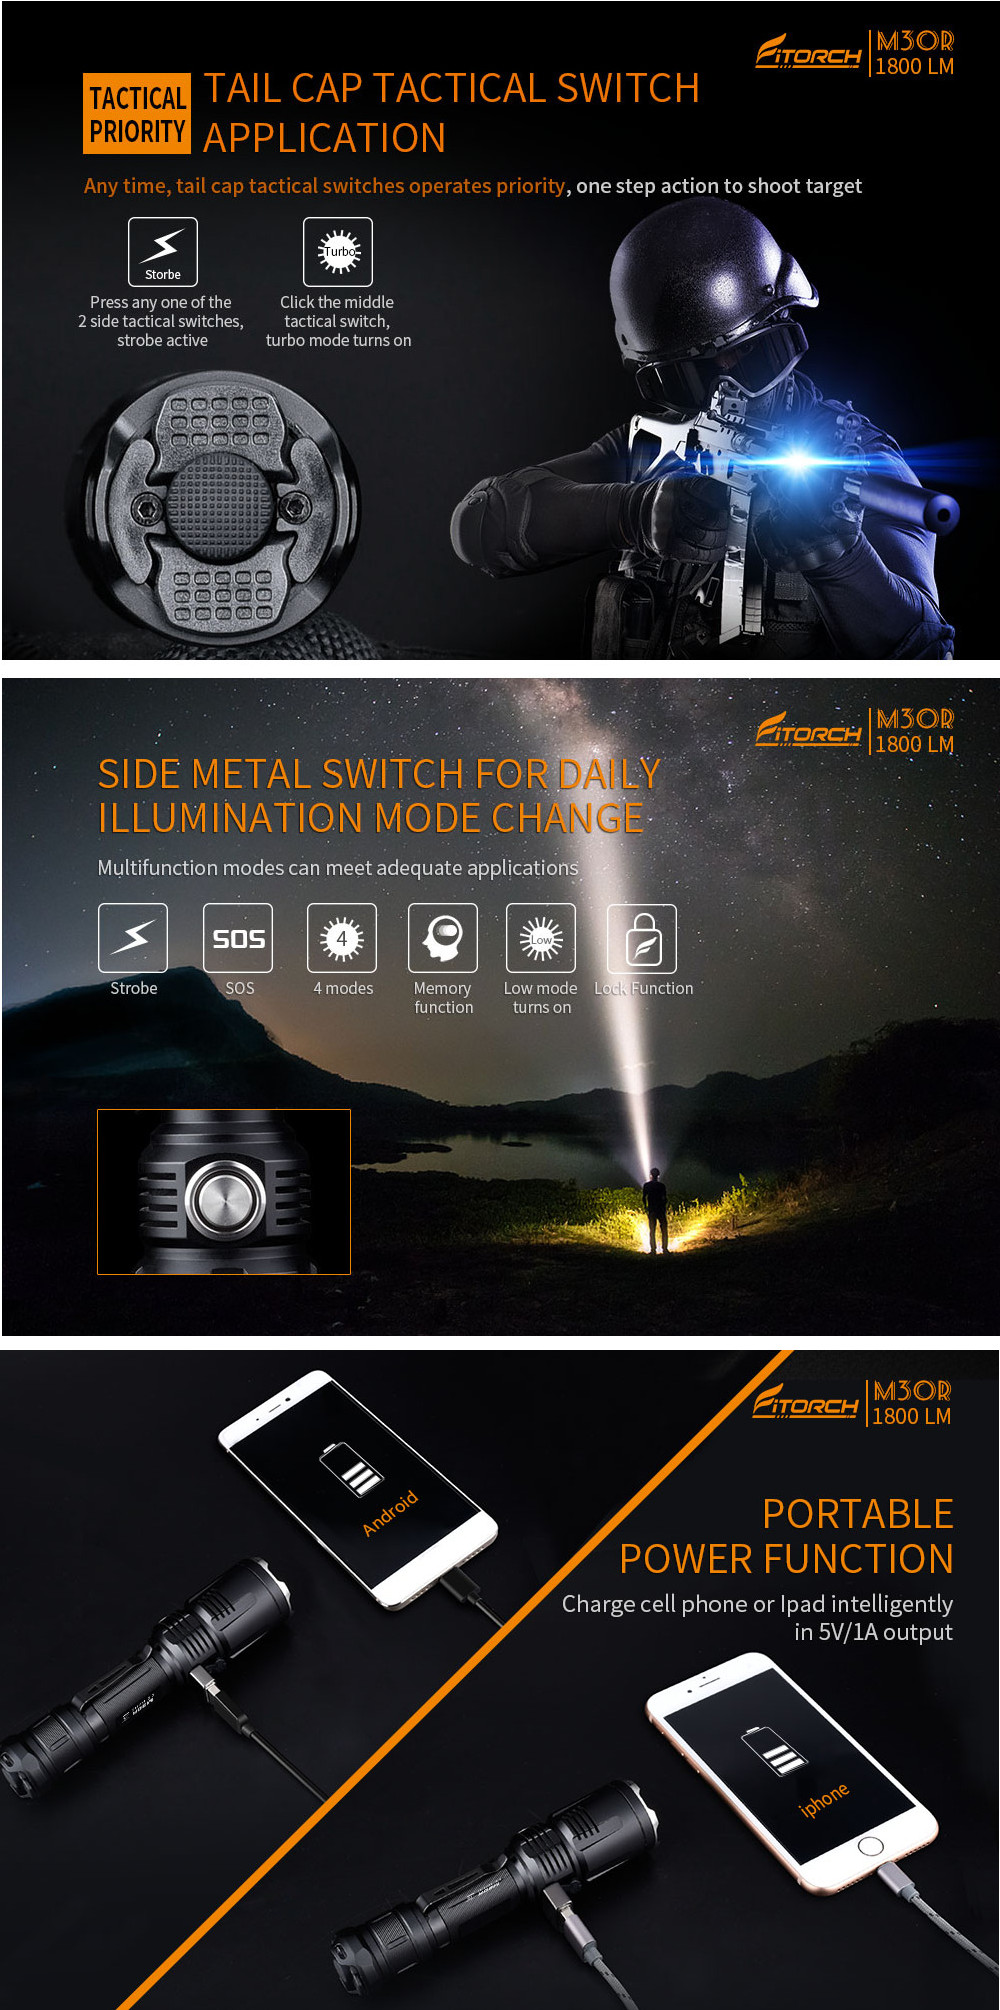 Fitorch M30R XHP35 HD 1800LM 6Modes Dimming USB Tactical LED Flashlight & Mobile Power Bank